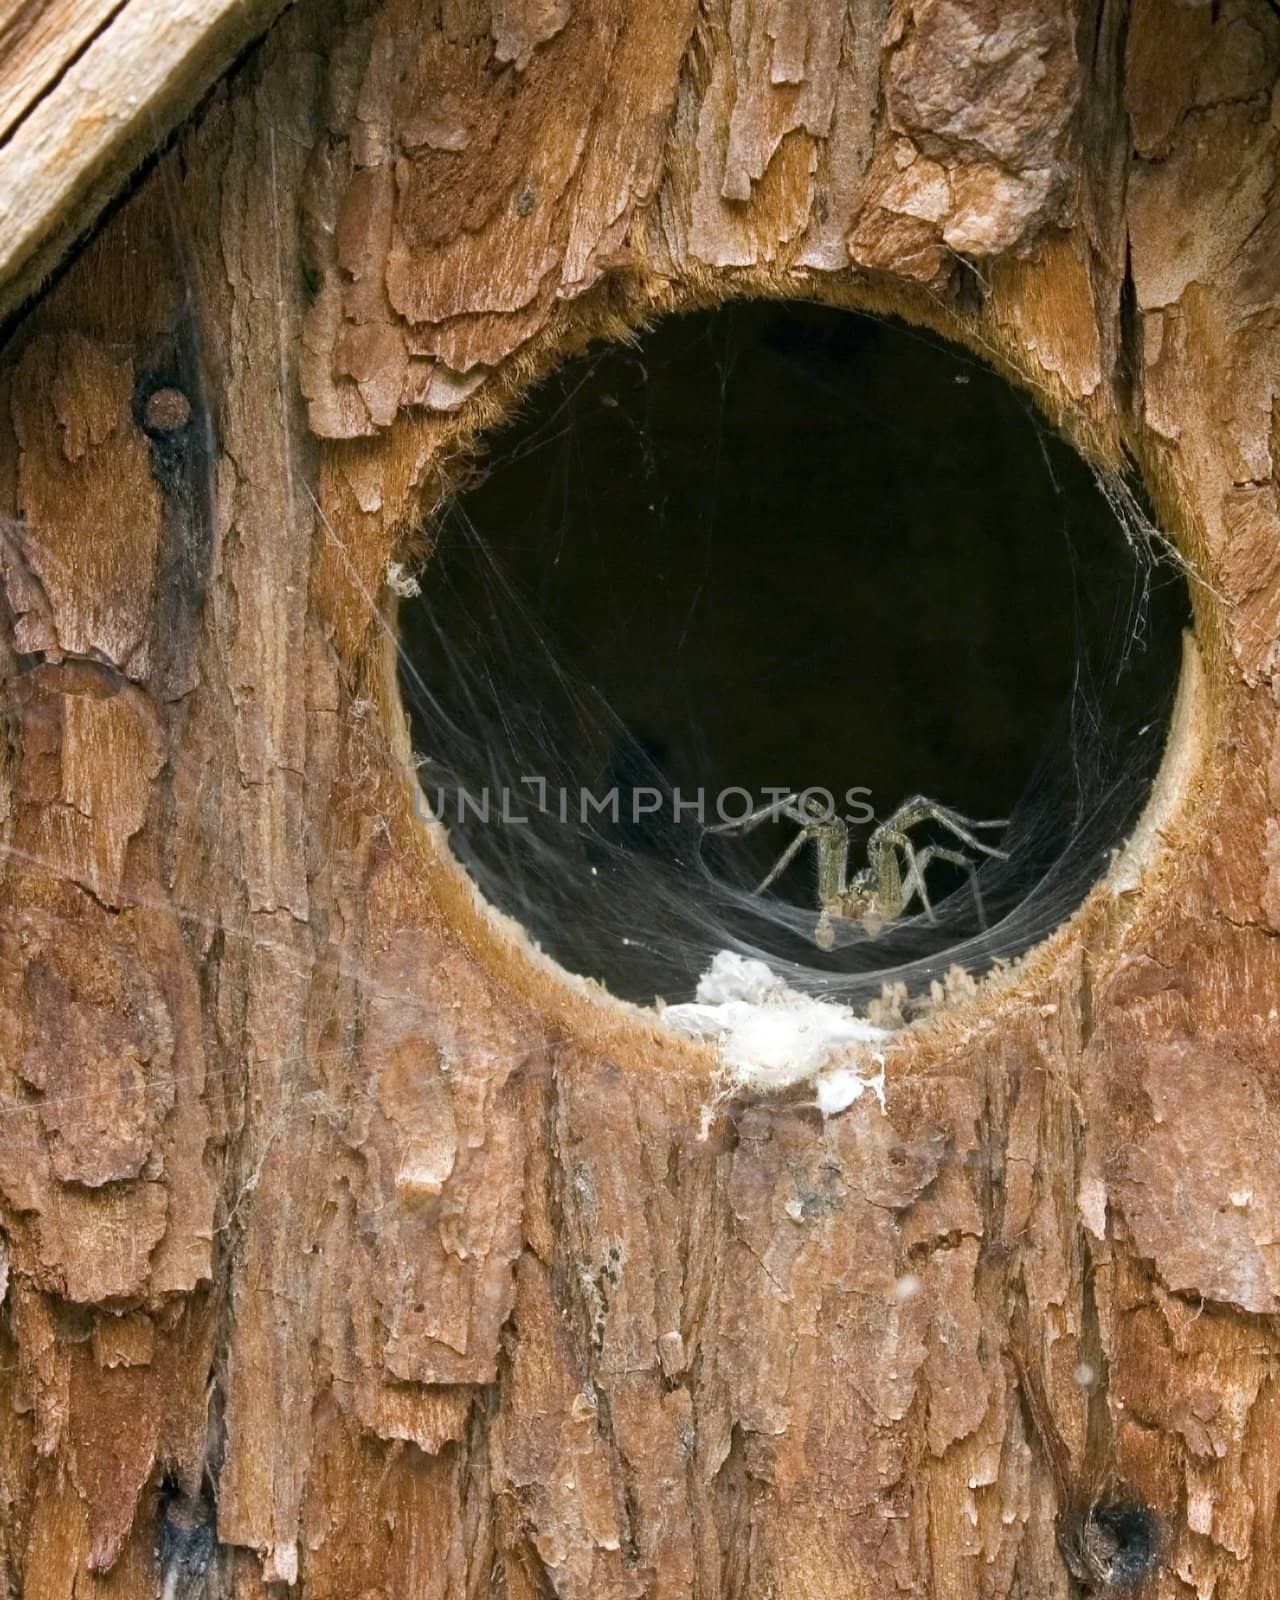 A spider taking up residence in a birdhoue.